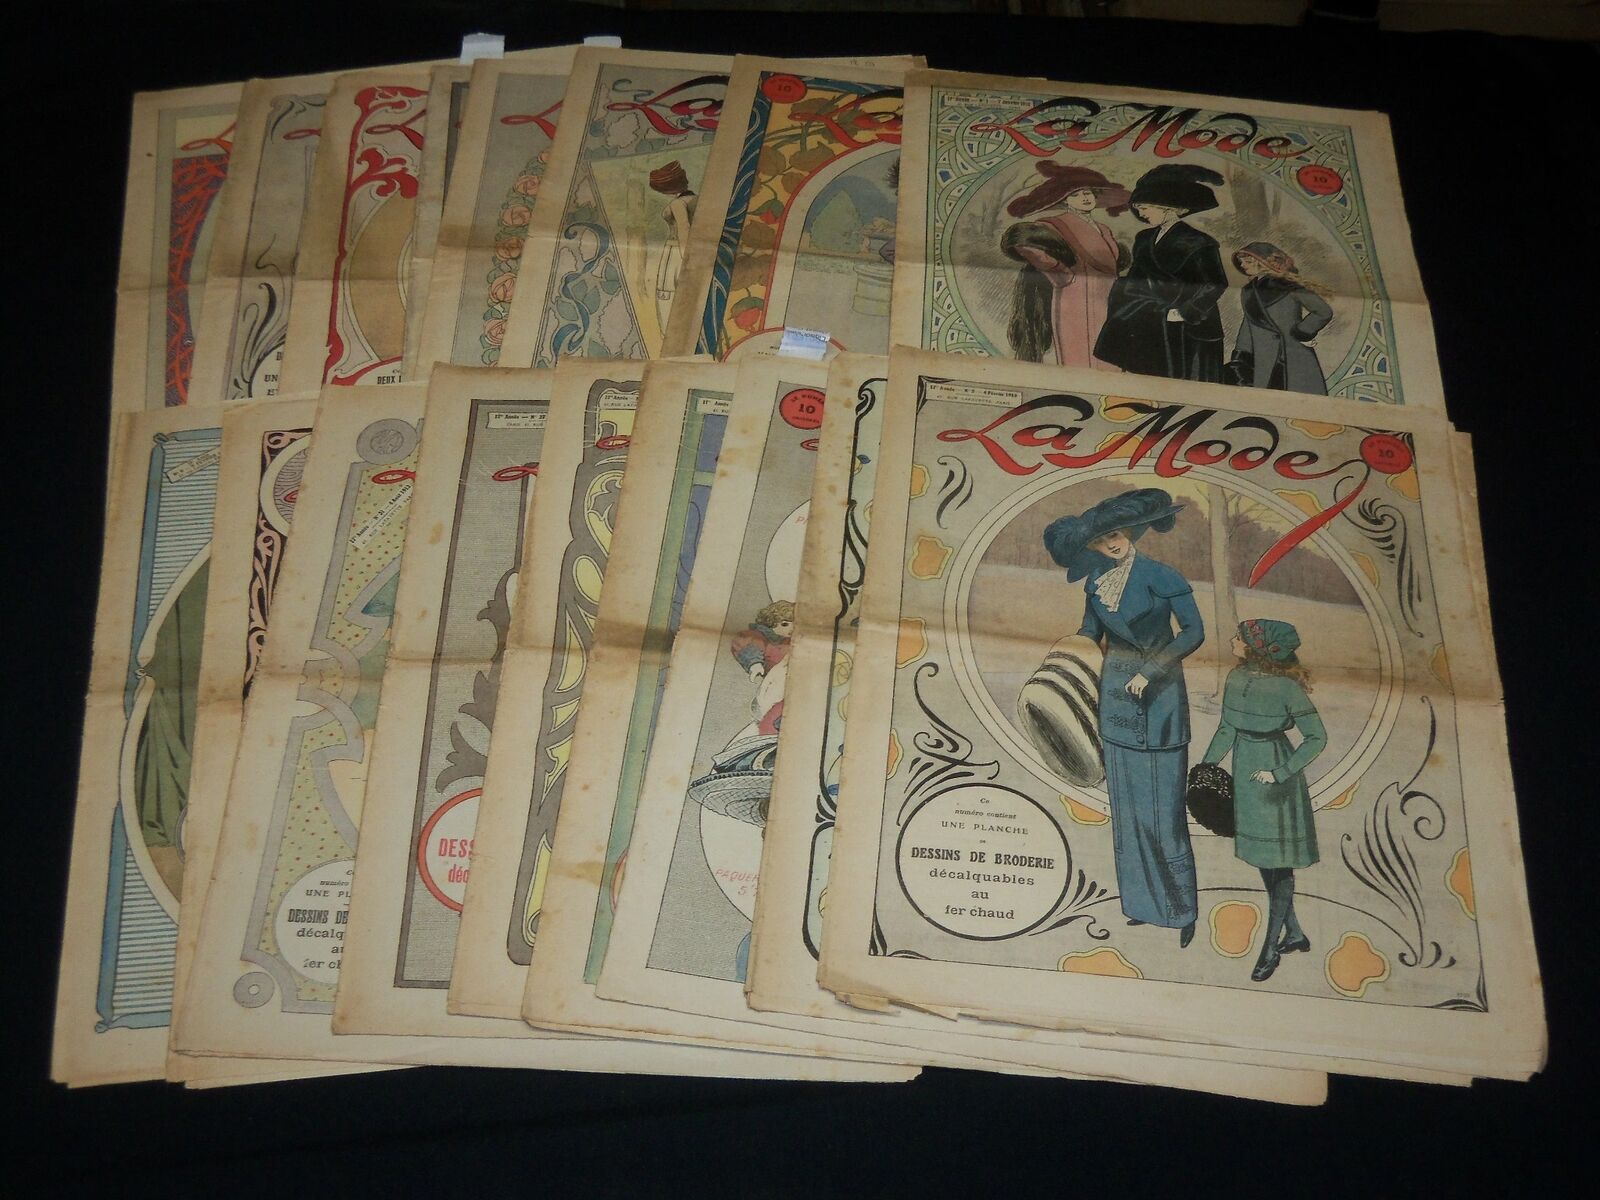 1911-1913 LA MODE FRENCH FASHION NEWSPAPER LOT OF 17 ISSUES - O 313